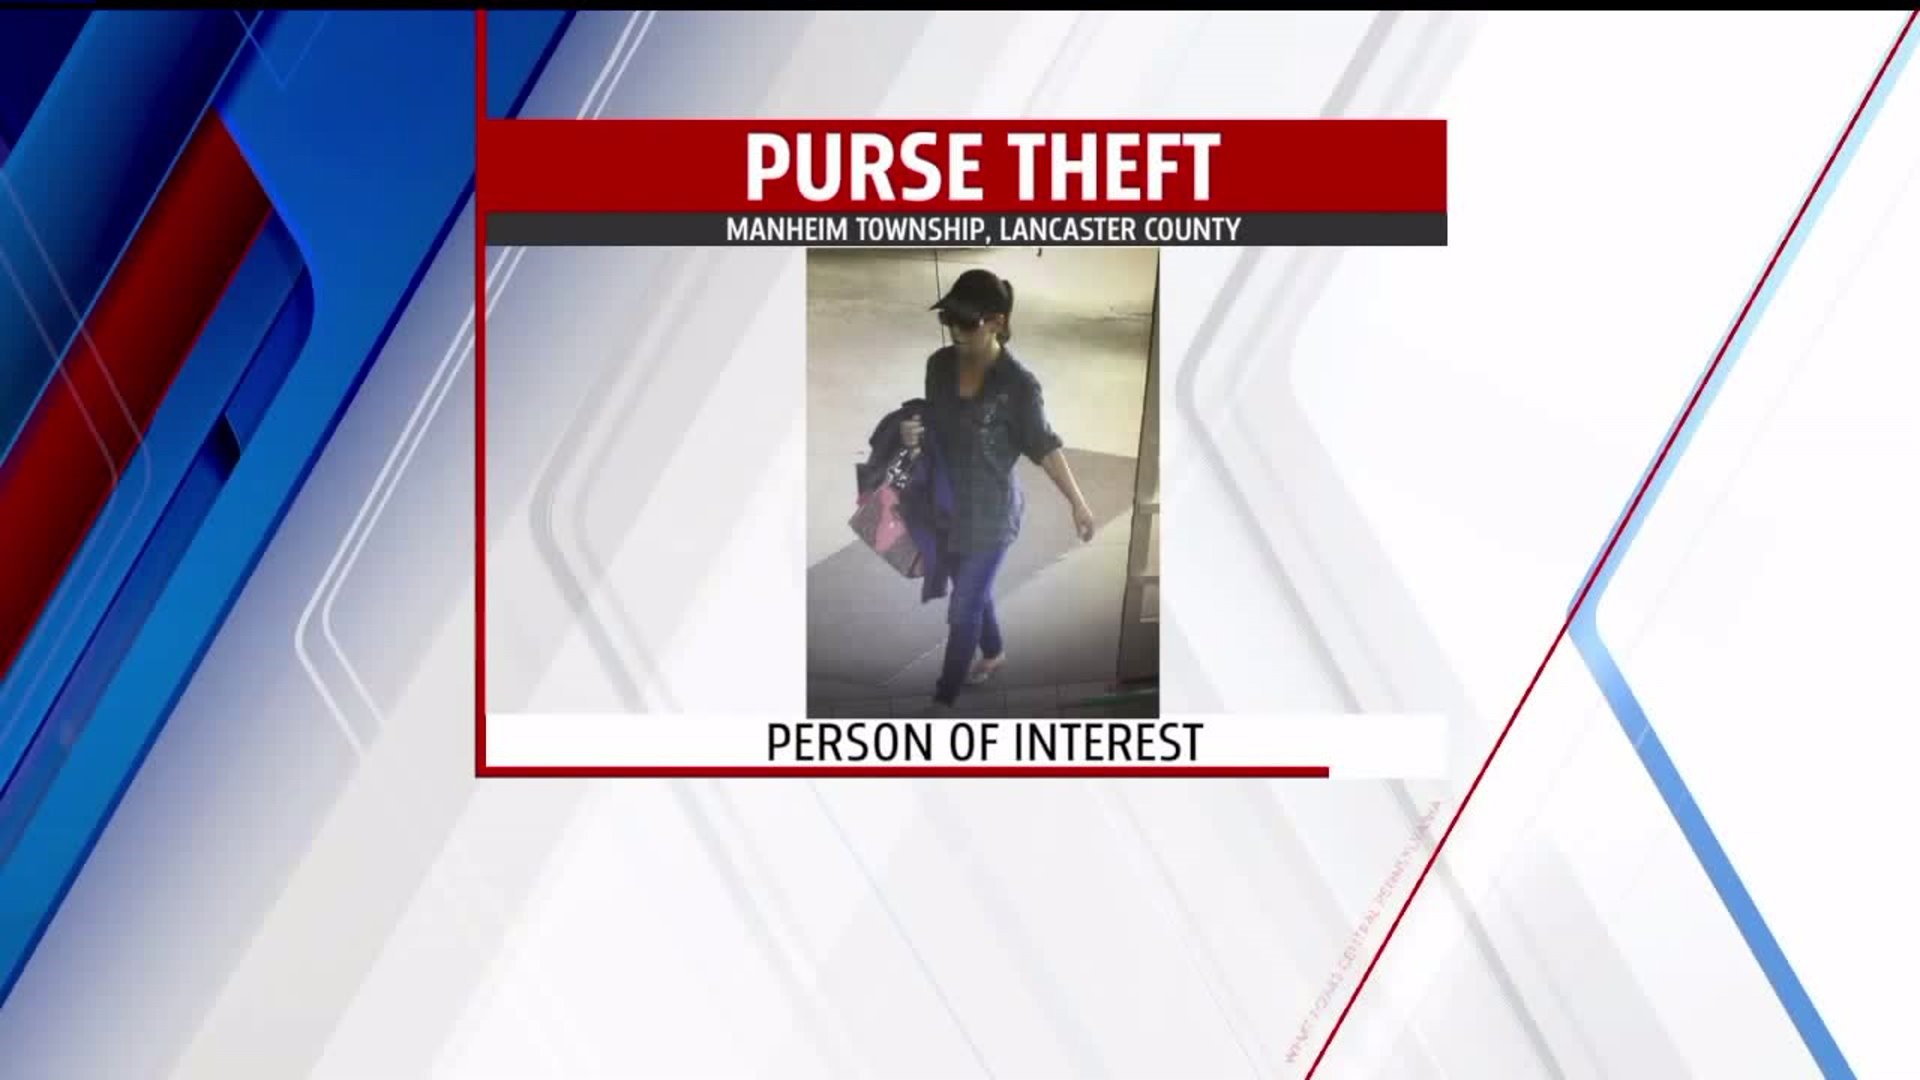 Manheim Township Police searching for suspected purse snatcher